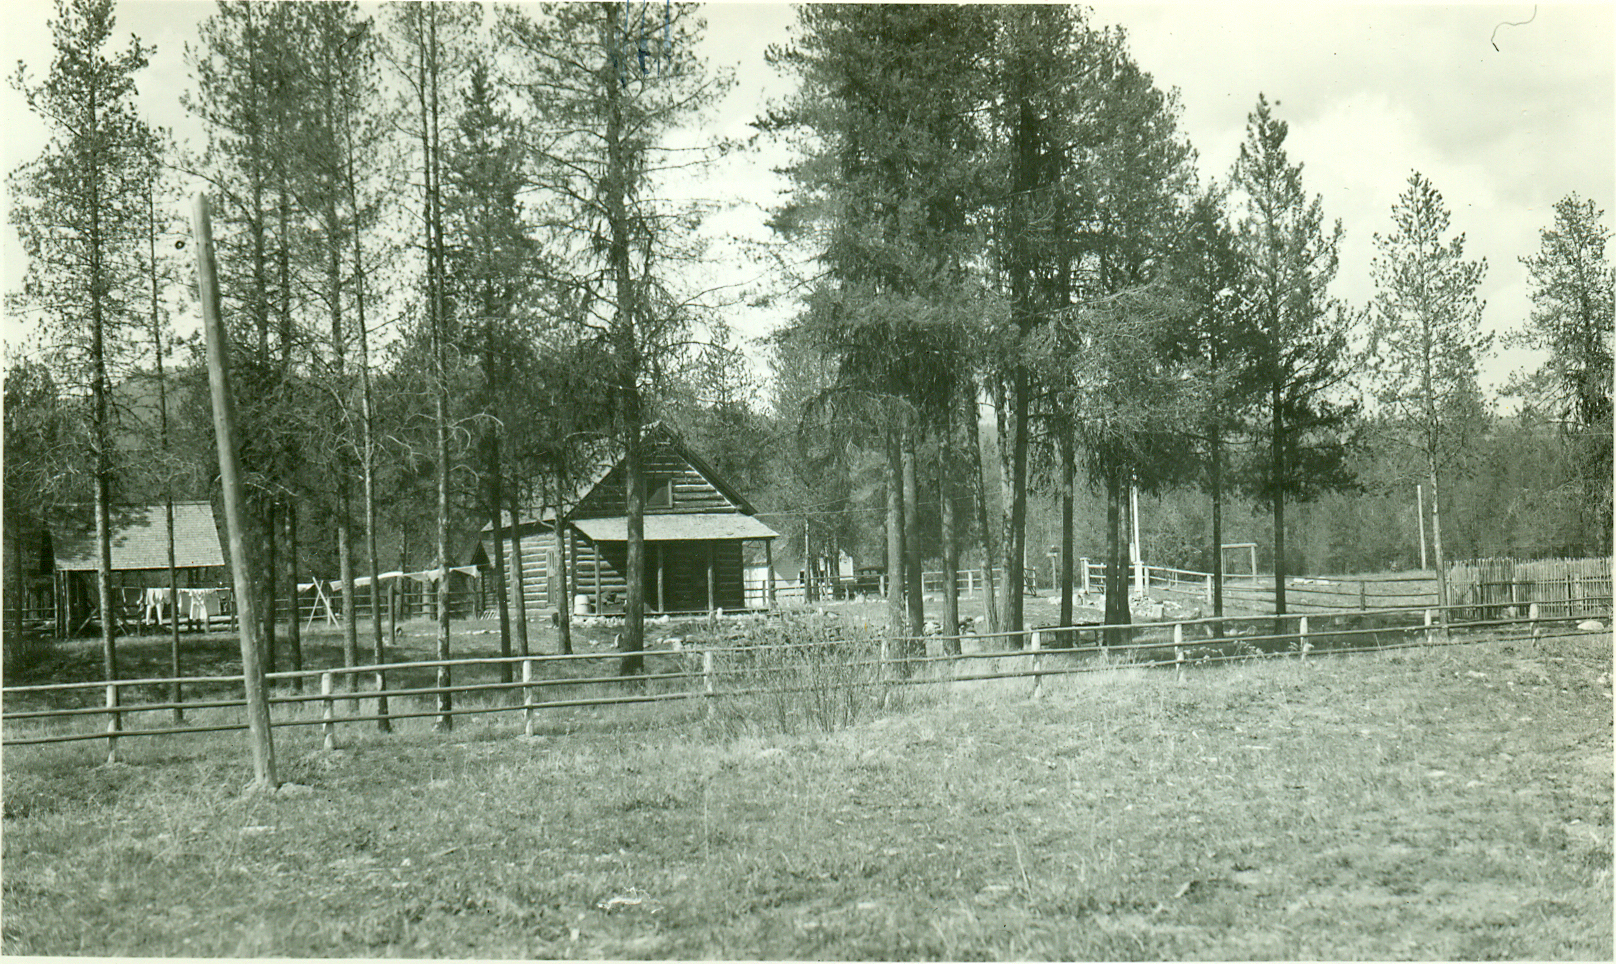 a black and white po of a fence and a wooden shack